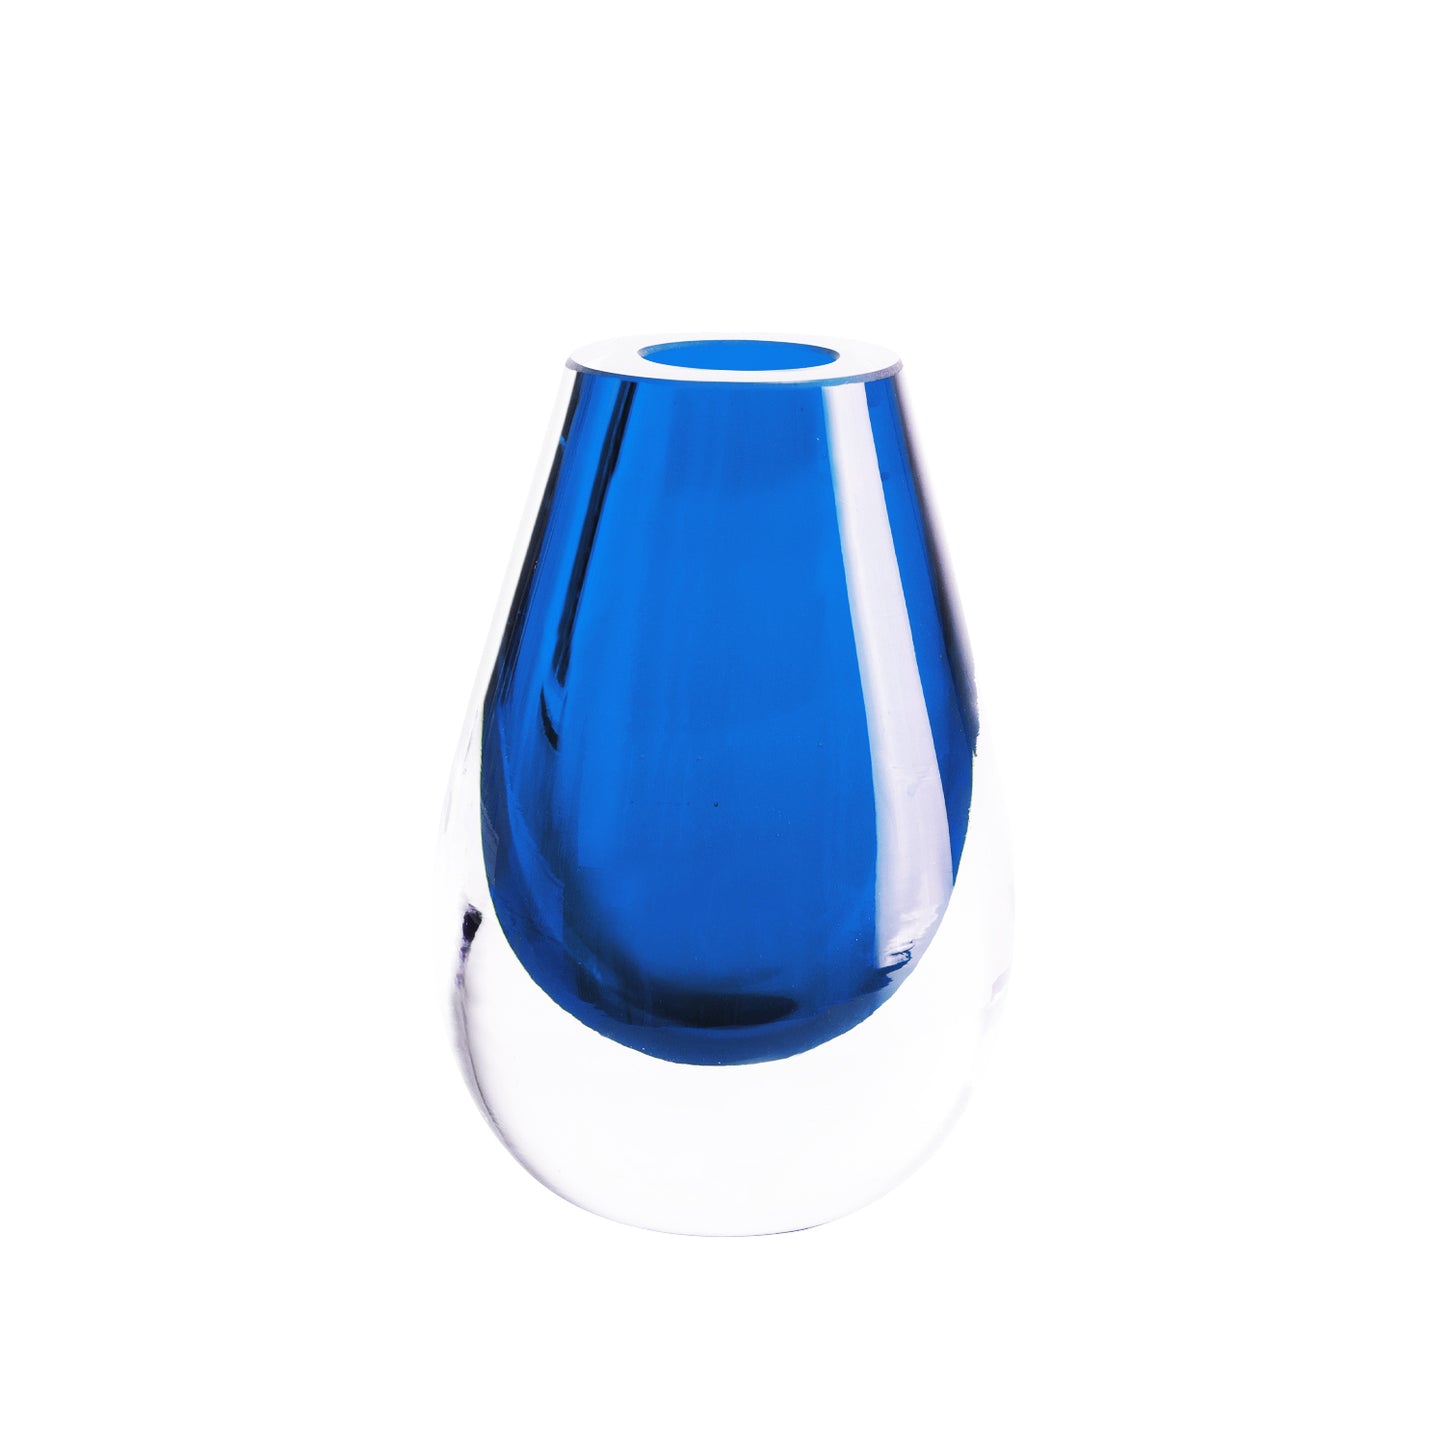 Drop Royal Blue Vase - 15 x 10.9 x 8 cm  - Mouth-Blown Thick Glass - Sustainable Elegance